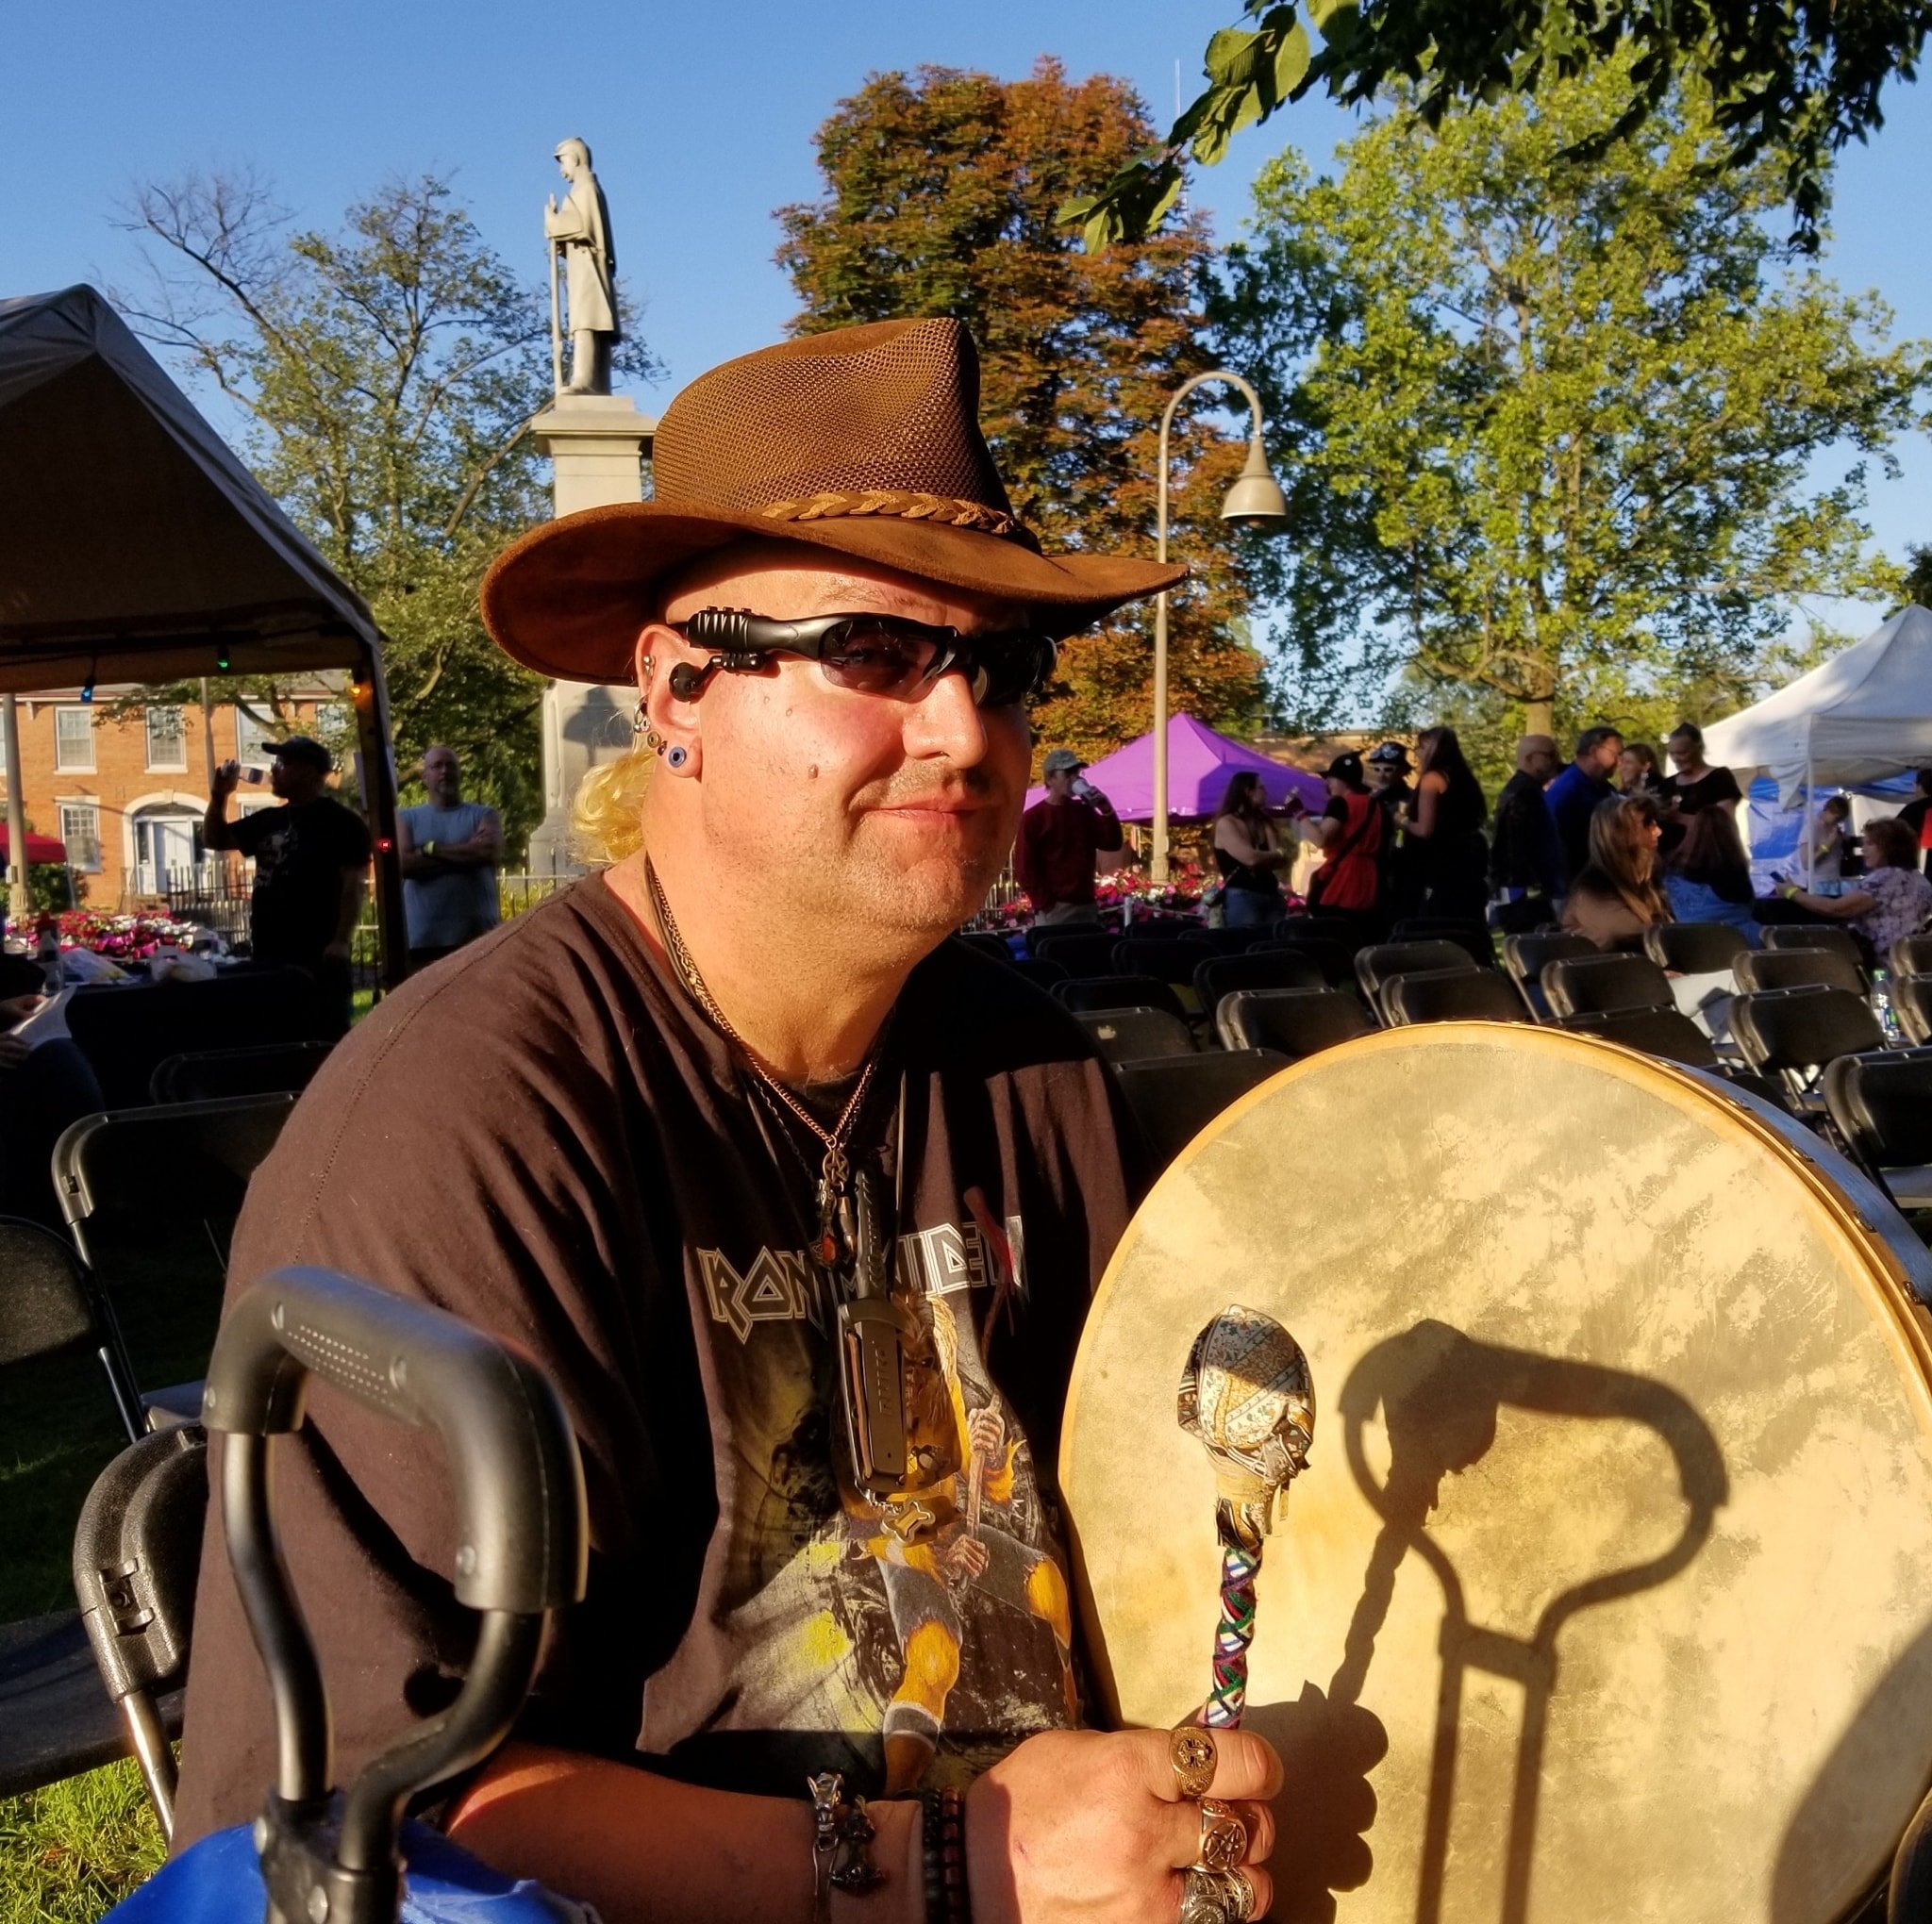 Man in brown hat and t-shirt wearing Native American jewelry holding a Native American drum stick and drum